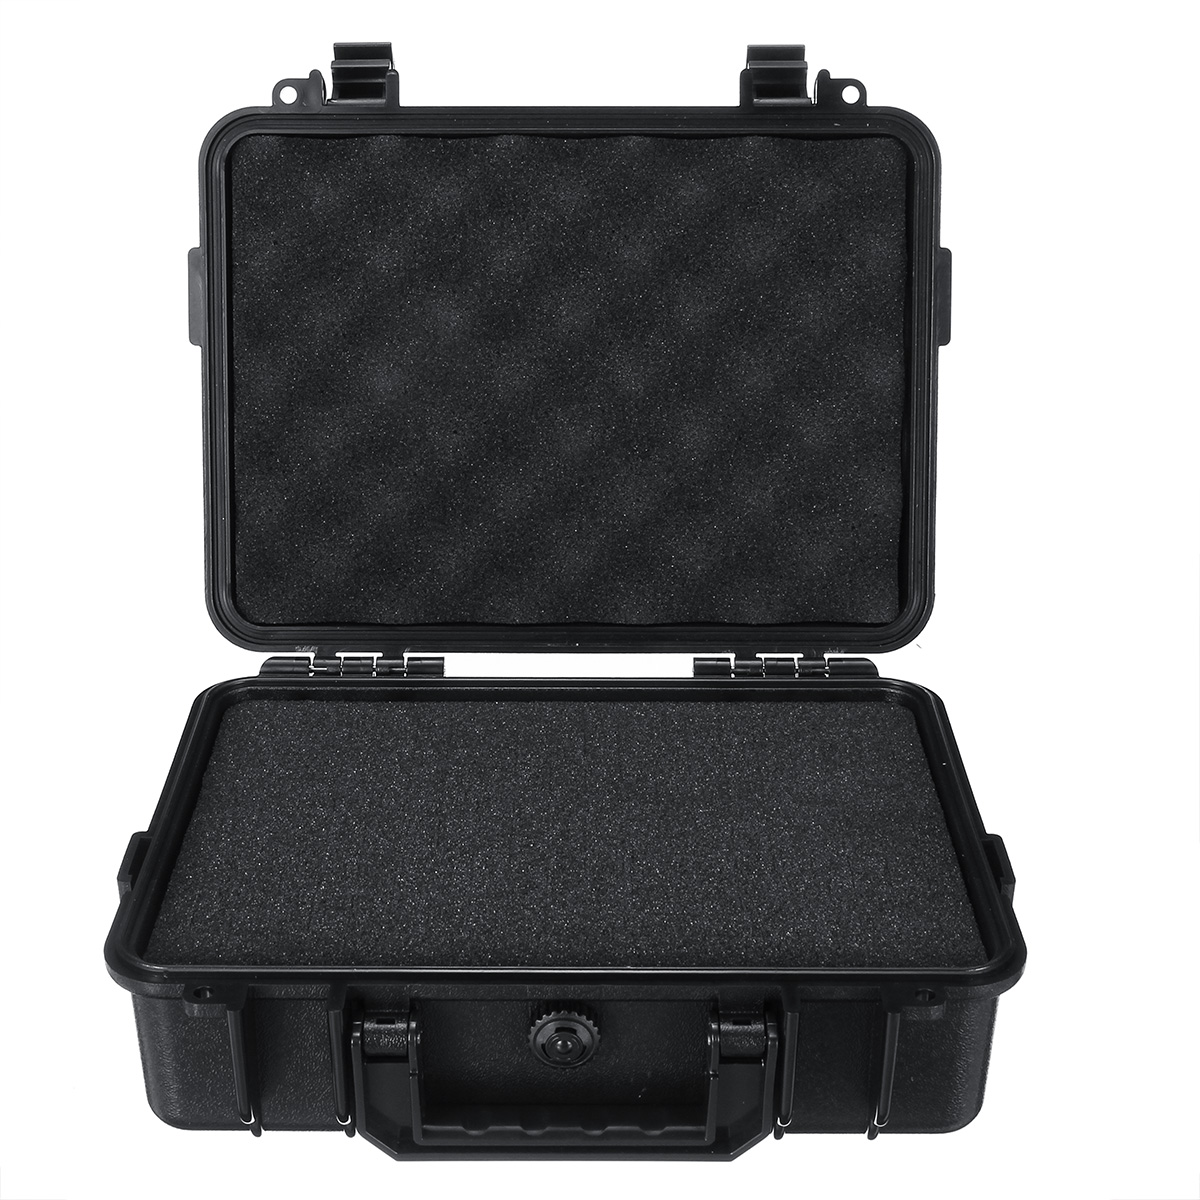 Outdoor-Portable-EDC-Instrument-Tool-Kits-Box-Waterproof-Shockproof-Protective-Safety-Storage-Case-1553948-7